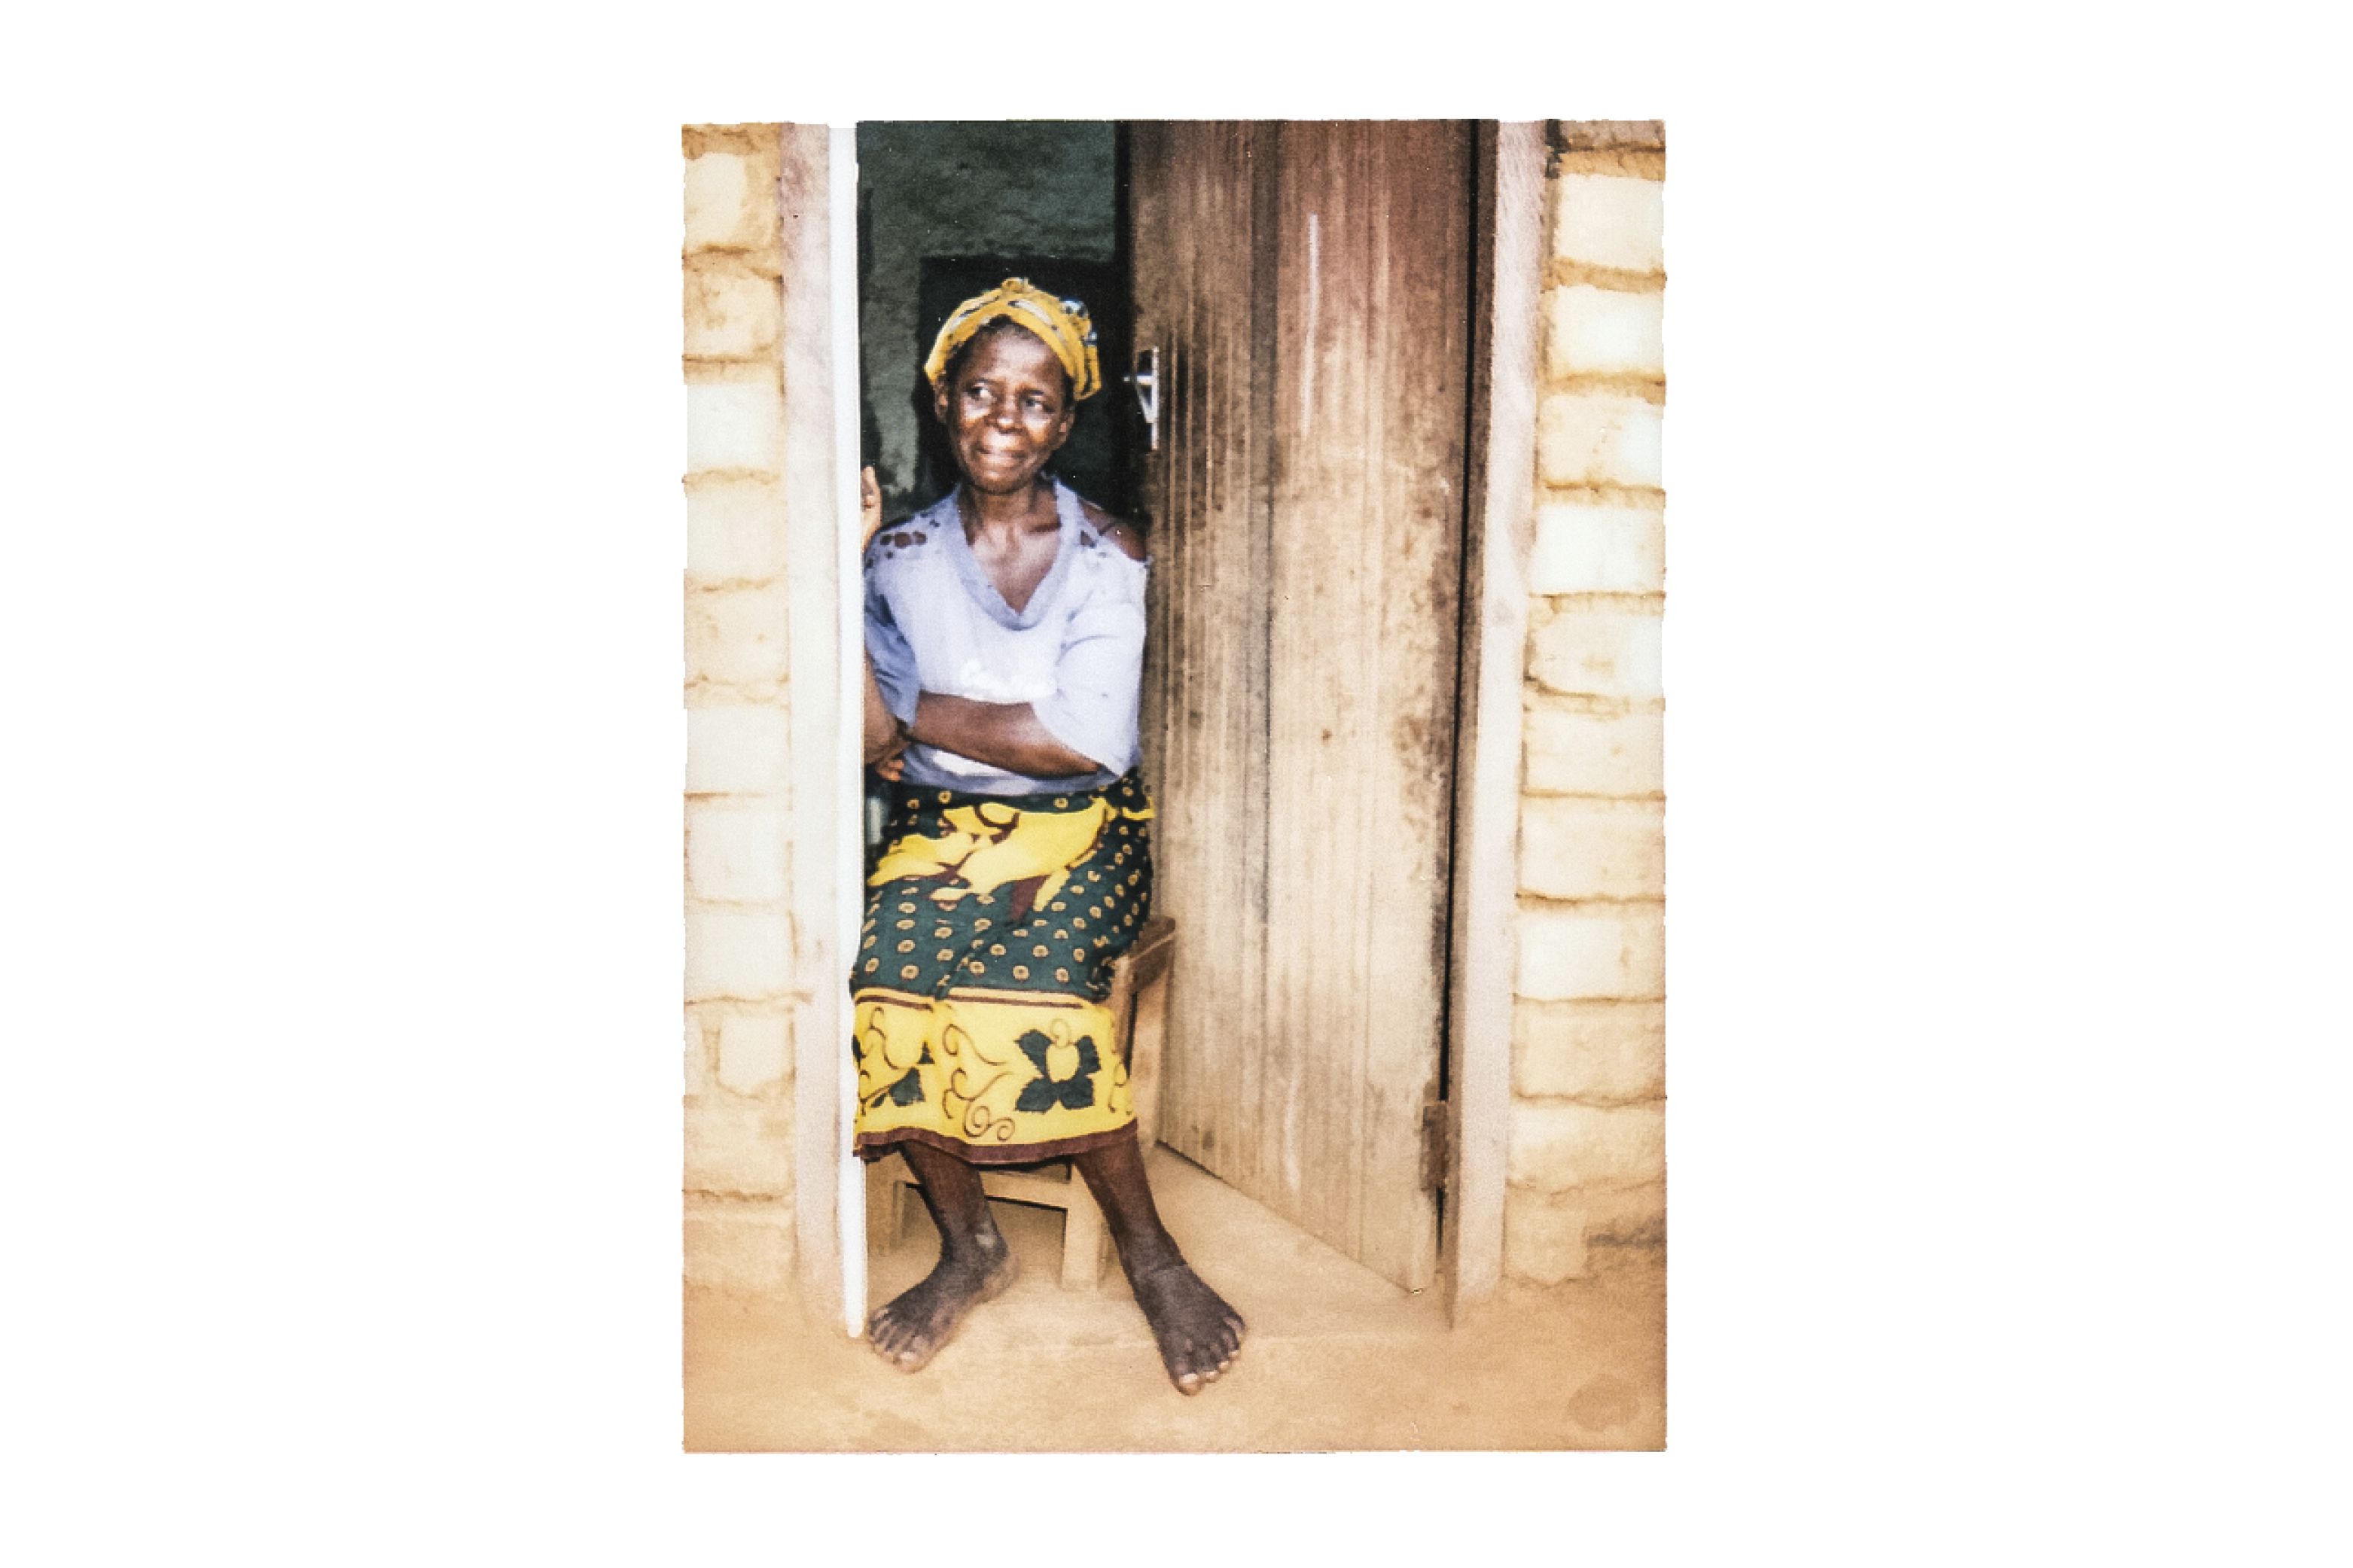 Felicia Willy lives alone in Mulemba village close to the Lujeri Tea Estate in southern Malawi. Her children are building an improved cookstove from clay for her. Image by Nathalie Bertrams. Malawi, 2017.